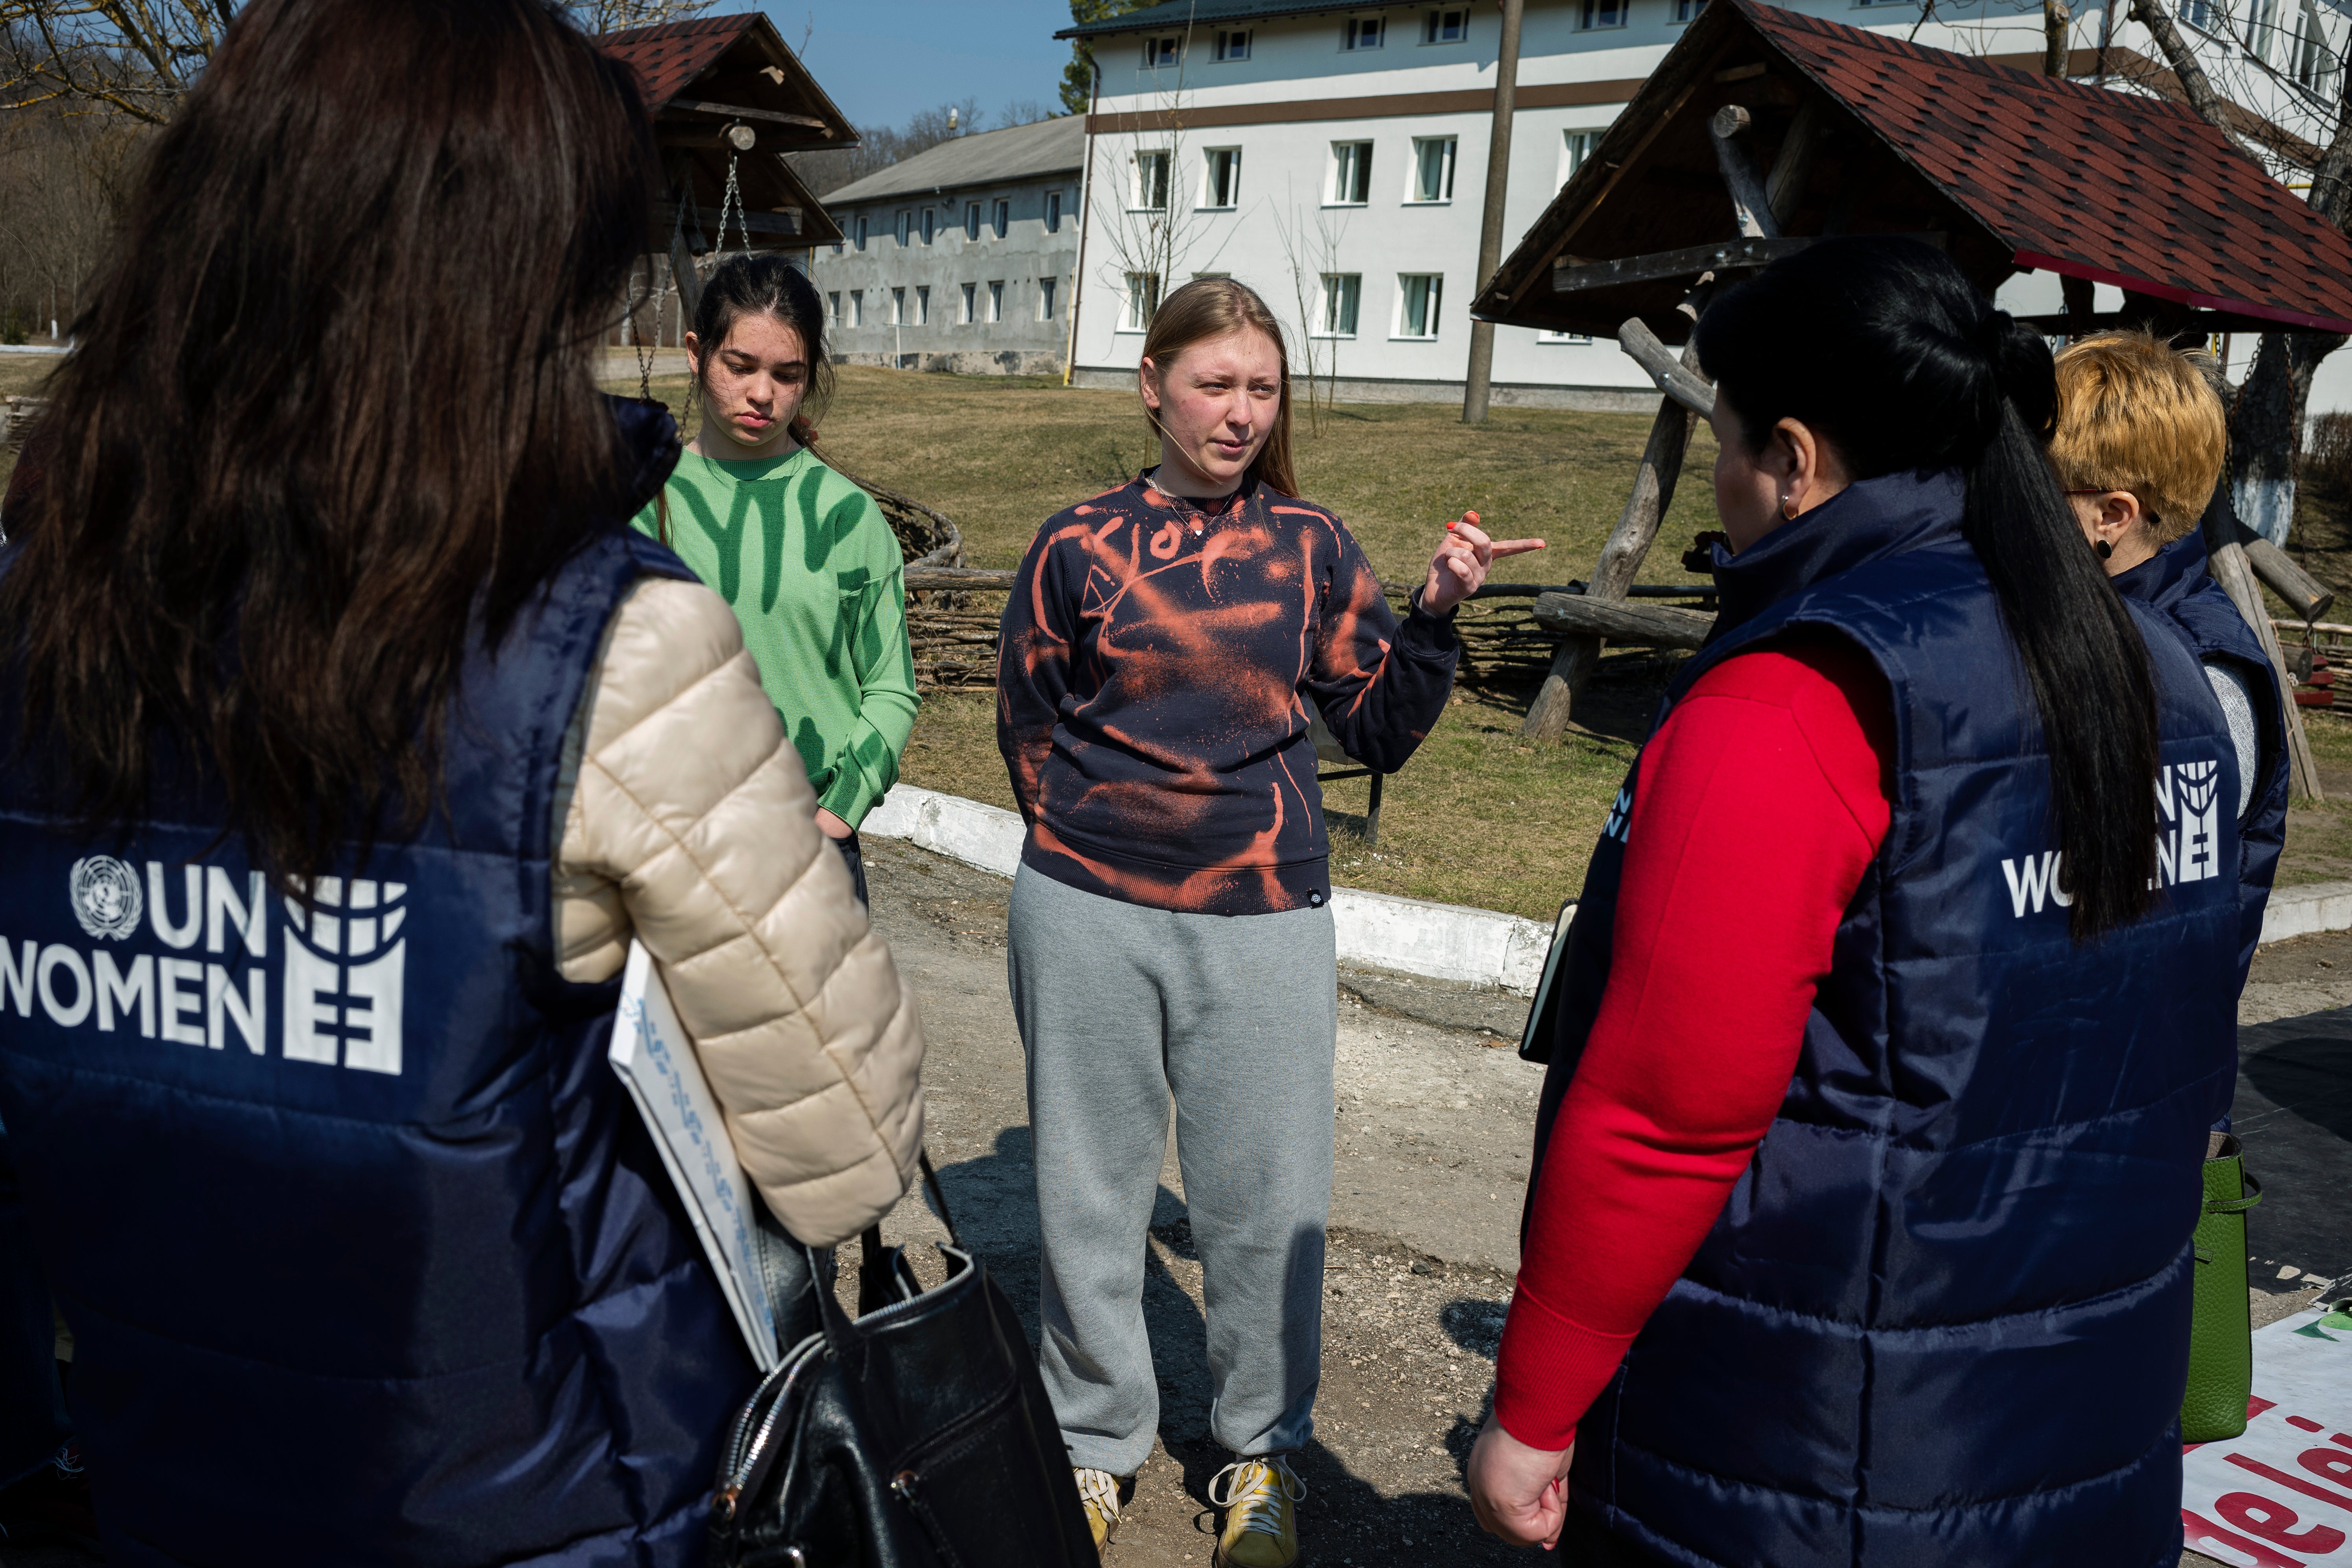 23-year-old Anna, from Mariupol, discussing with UN Women team at the temporary placement center in Vatici, Orhei district, Moldova. Photo credit: Maxime Fossat / UN Women